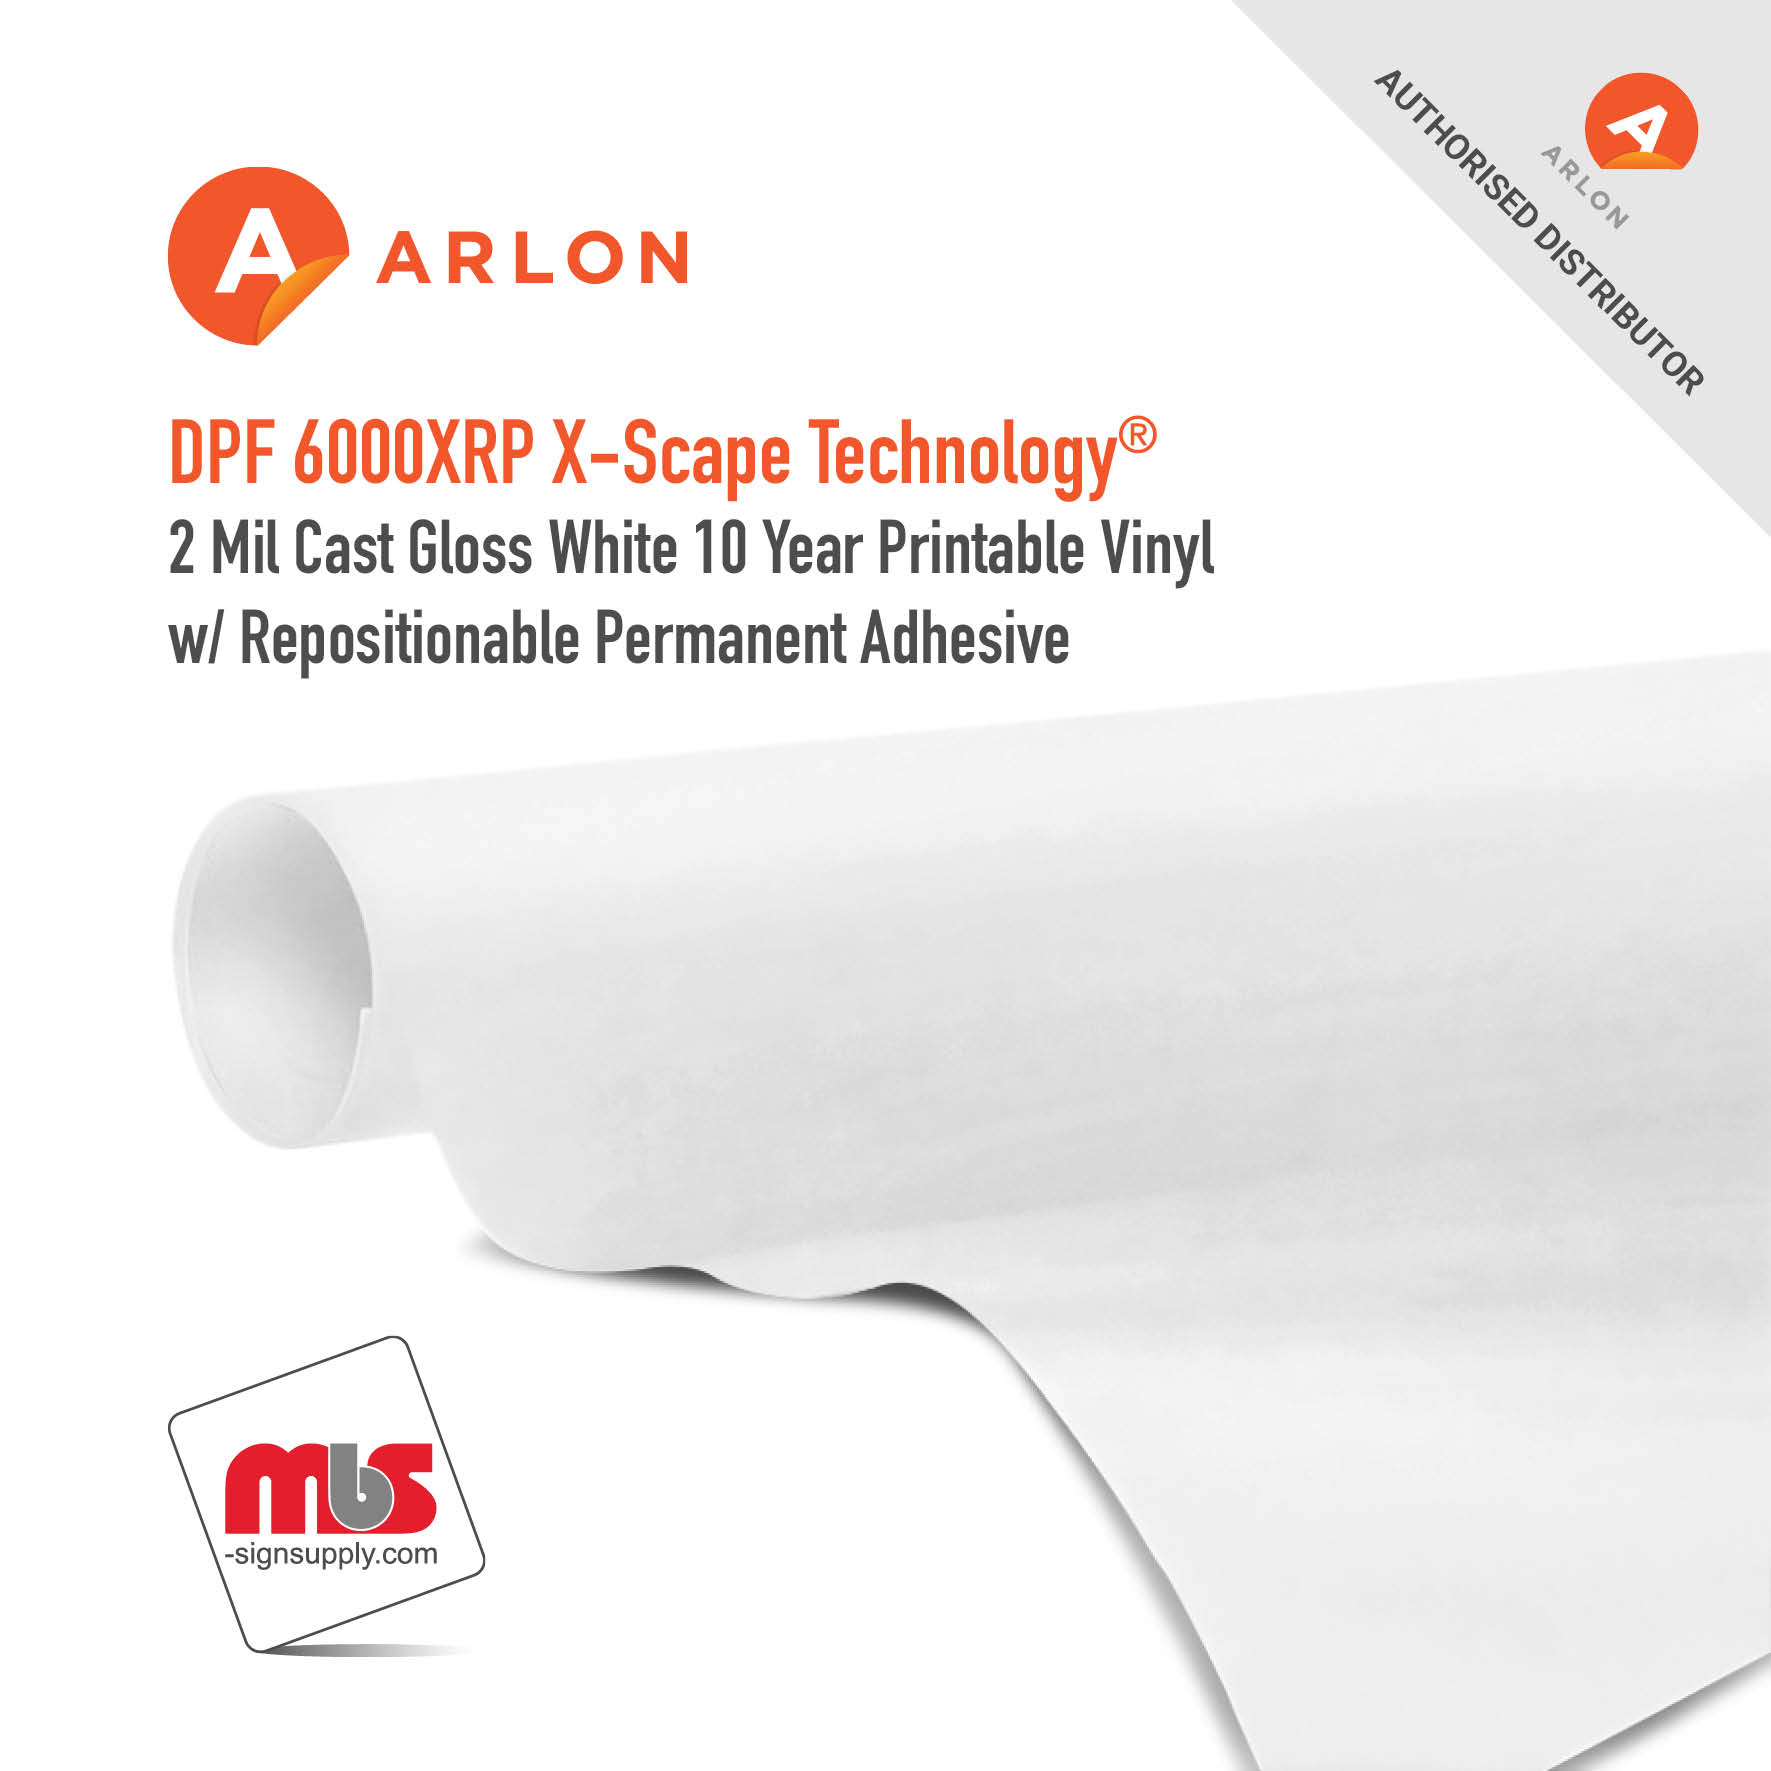 30'' x 50 Yard Roll - Arlon DPF 6000XRP X-Scape Technology® 2 Mil Cast Gloss White 10 Year Printable Vinyl w/ Repositionable Permanent Adhesive